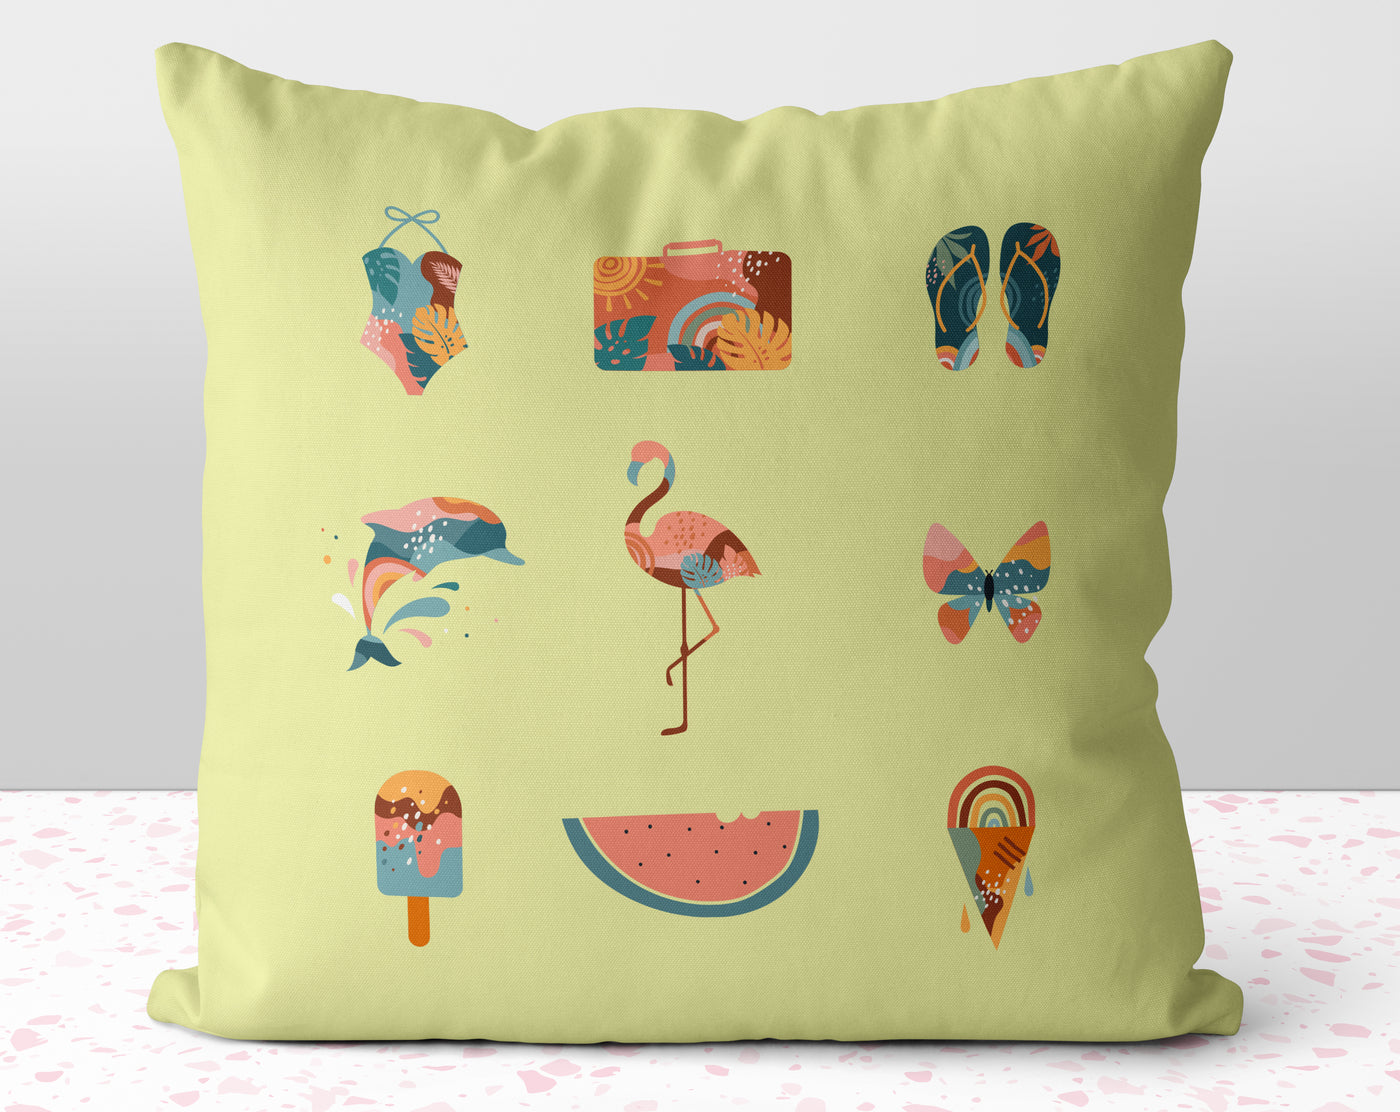 Boho Summer Yellow Square Pillow Cover Throw with Flamingo Dolphin Popsicle Watermelon Accents Cover